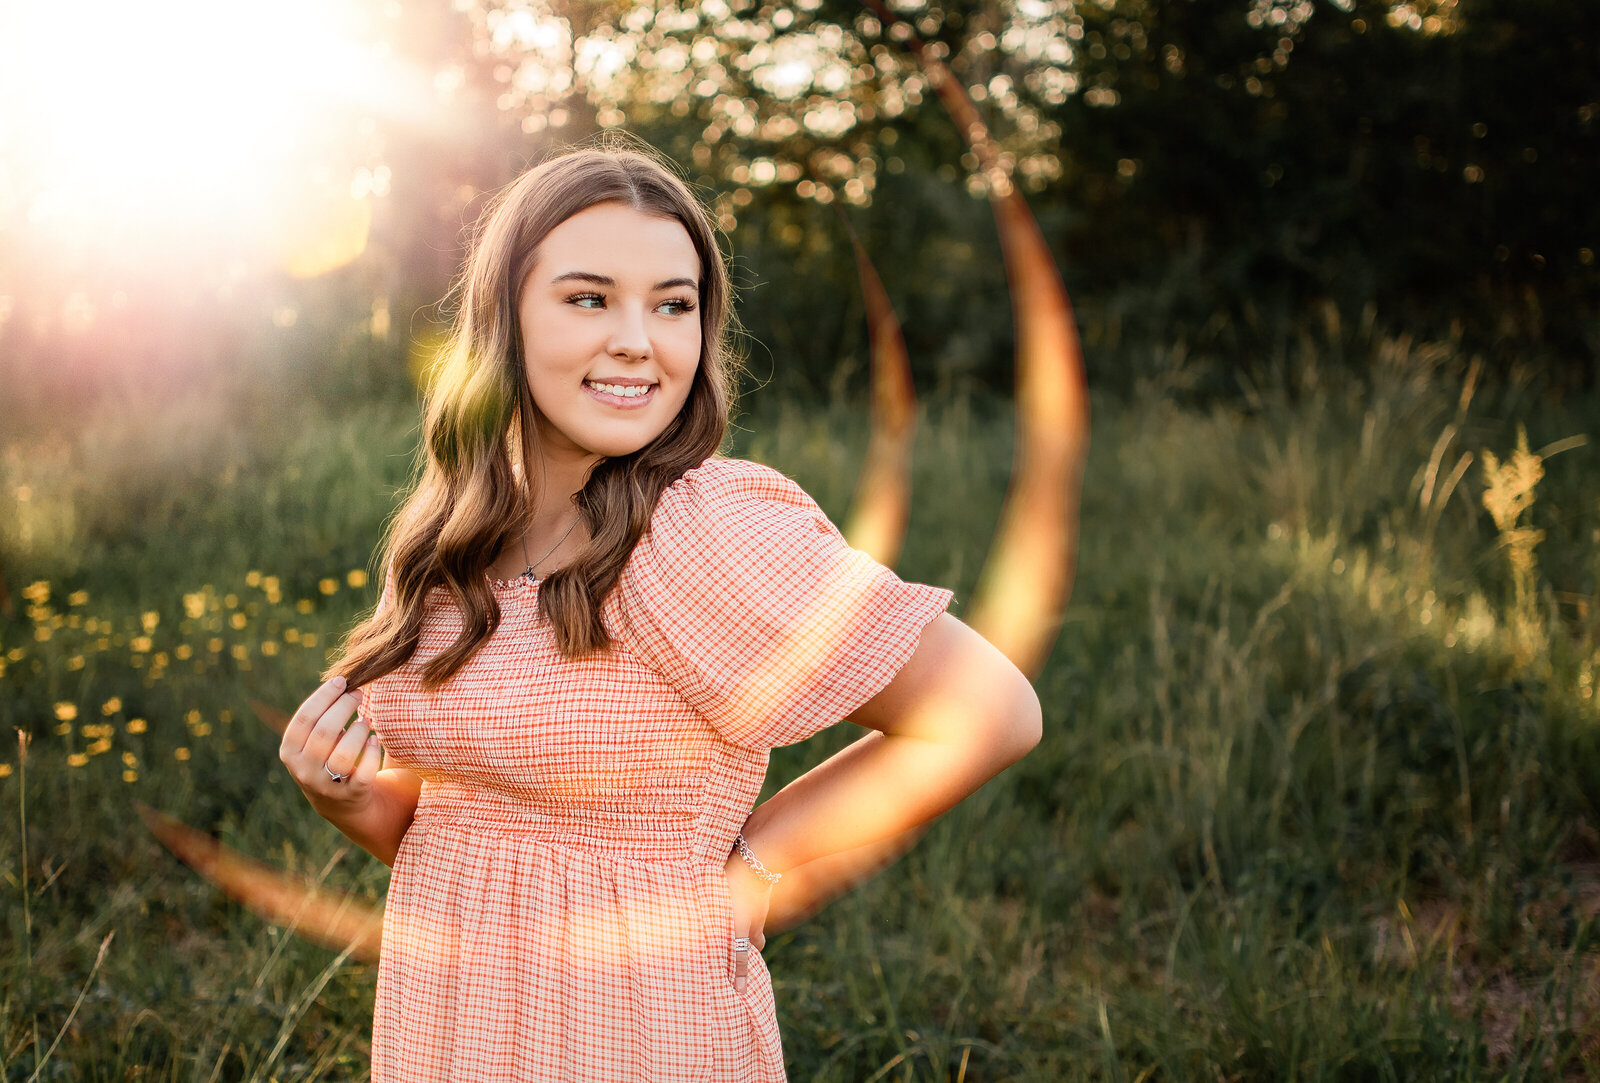 A high school senior stands in a field and smiles over her shoulder as the sun shines on her.